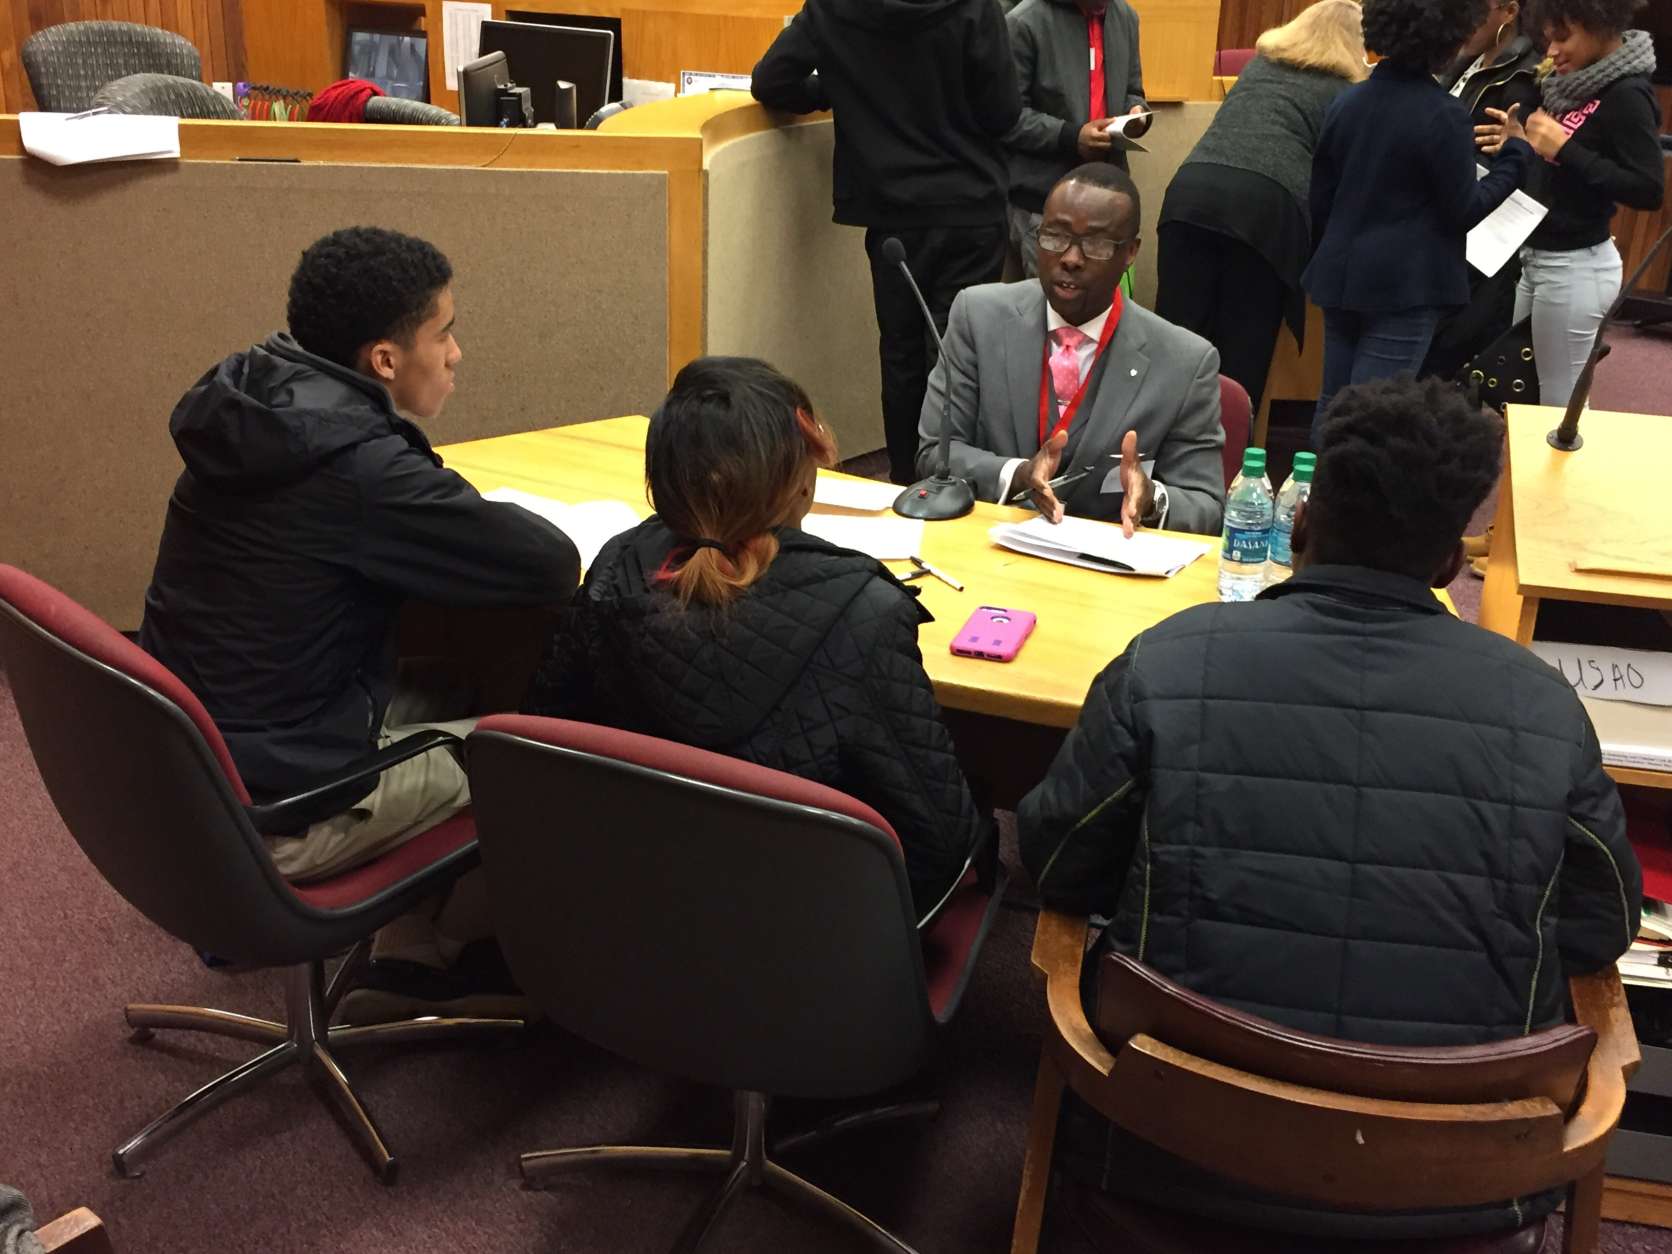  Students worked with lawyers to conduct mock trials at the DC Superior Court. (WTOP/John Domen) 